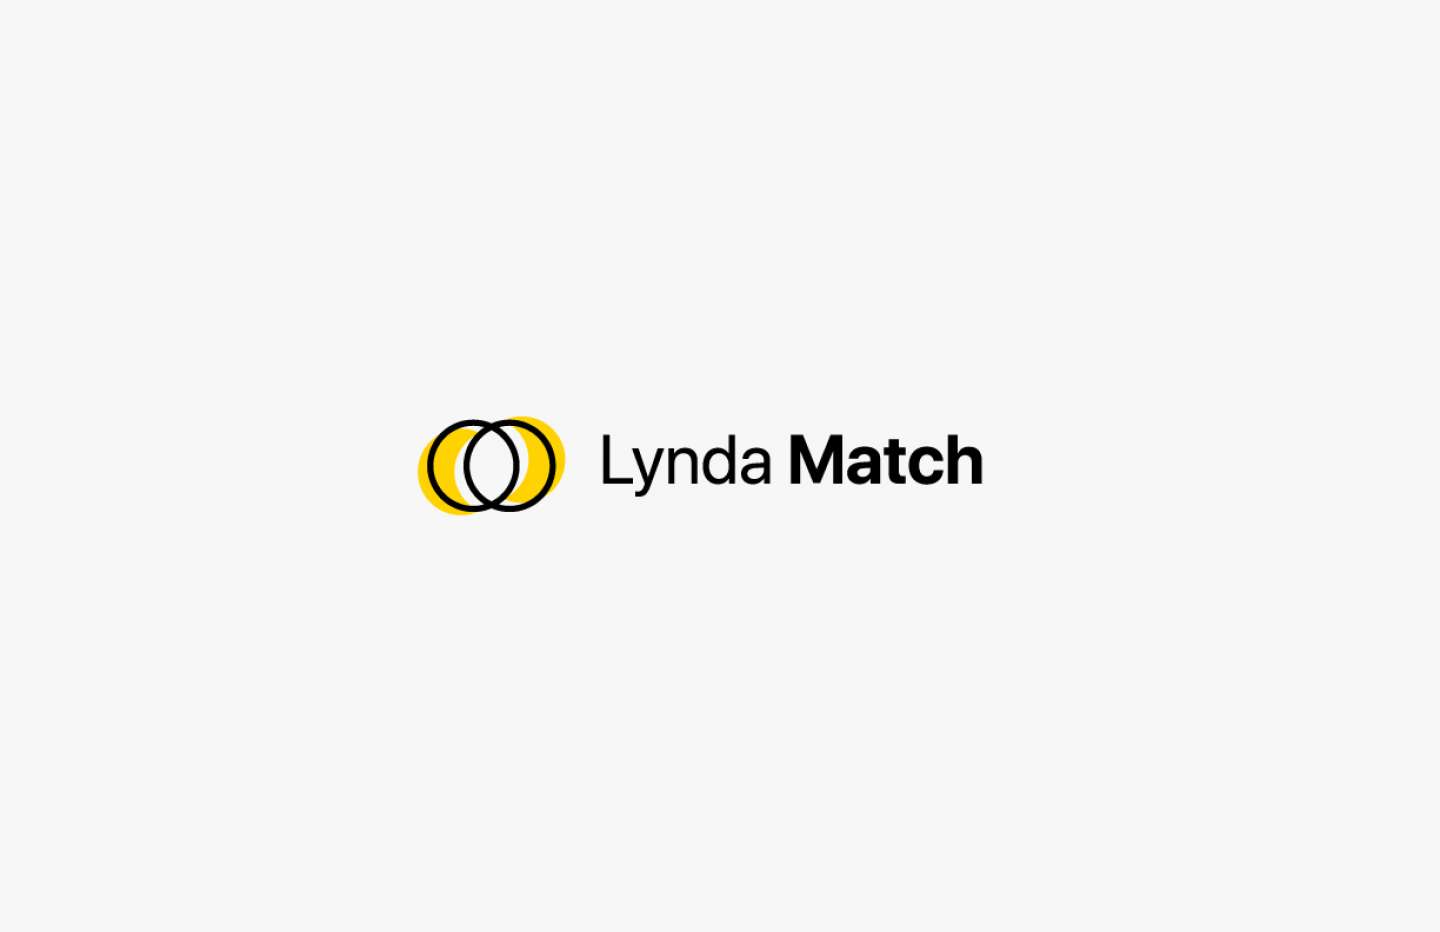 Lynda Match, Learn from each other.